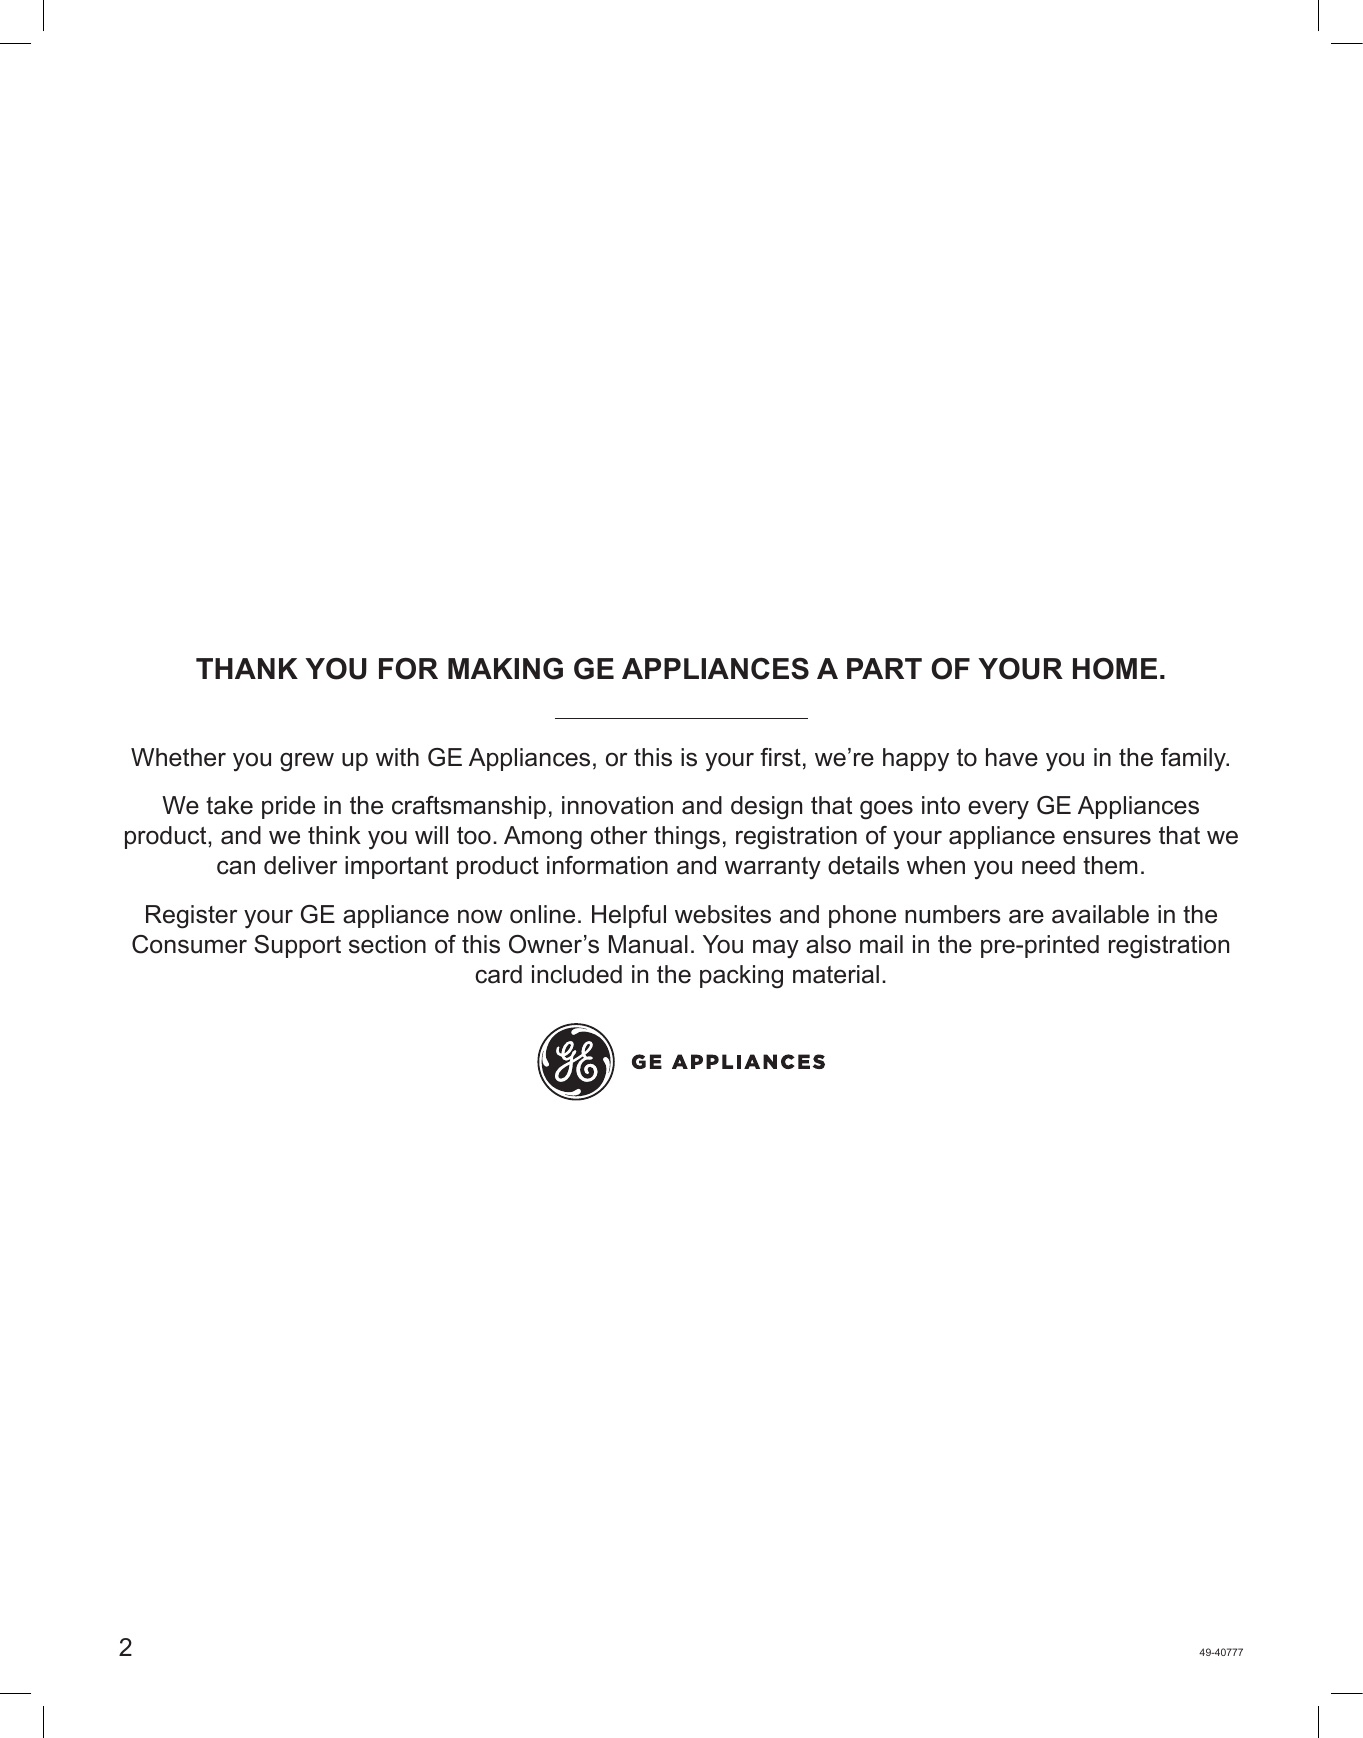 249-40777THANK YOU FOR MAKING GE APPLIANCES A PART OF YOUR HOME.Whether you grew up with GE Appliances, or this is your first, we’re happy to have you in the family. We take pride in the craftsmanship, innovation and design that goes into every GE Appliances product, and we think you will too. Among other things, registration of your appliance ensures that we can deliver important product information and warranty details when you need them. Register your GE appliance now online. Helpful websites and phone numbers are available in the Consumer Support section of this Owner’s Manual. You may also mail in the pre-printed registration card included in the packing material.